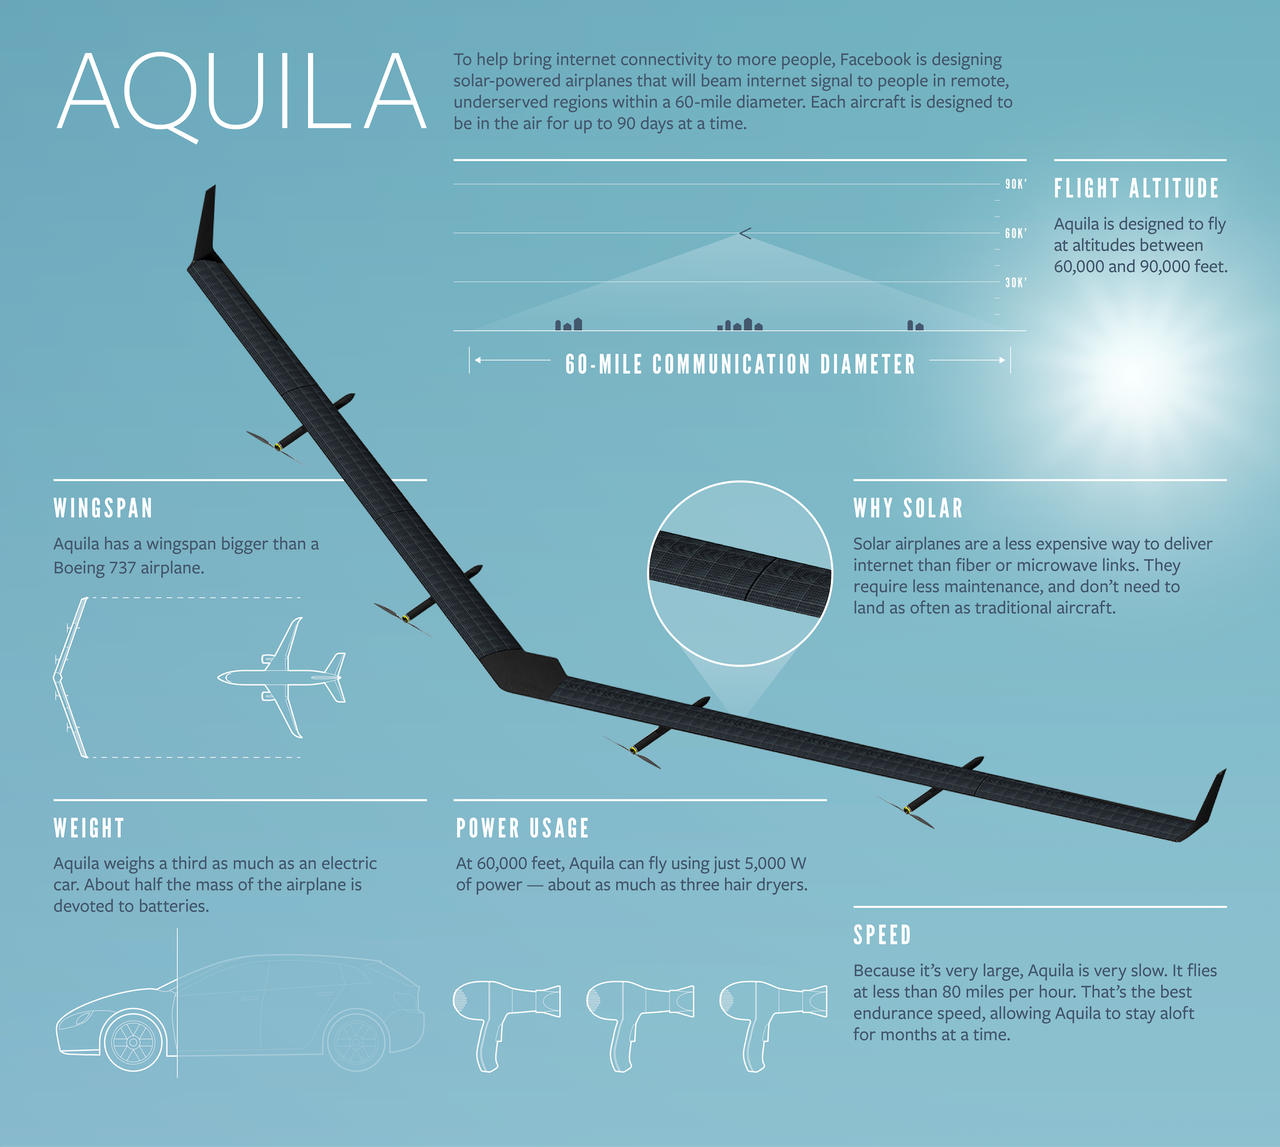 An infographic about the Aquila provided by Facebook.